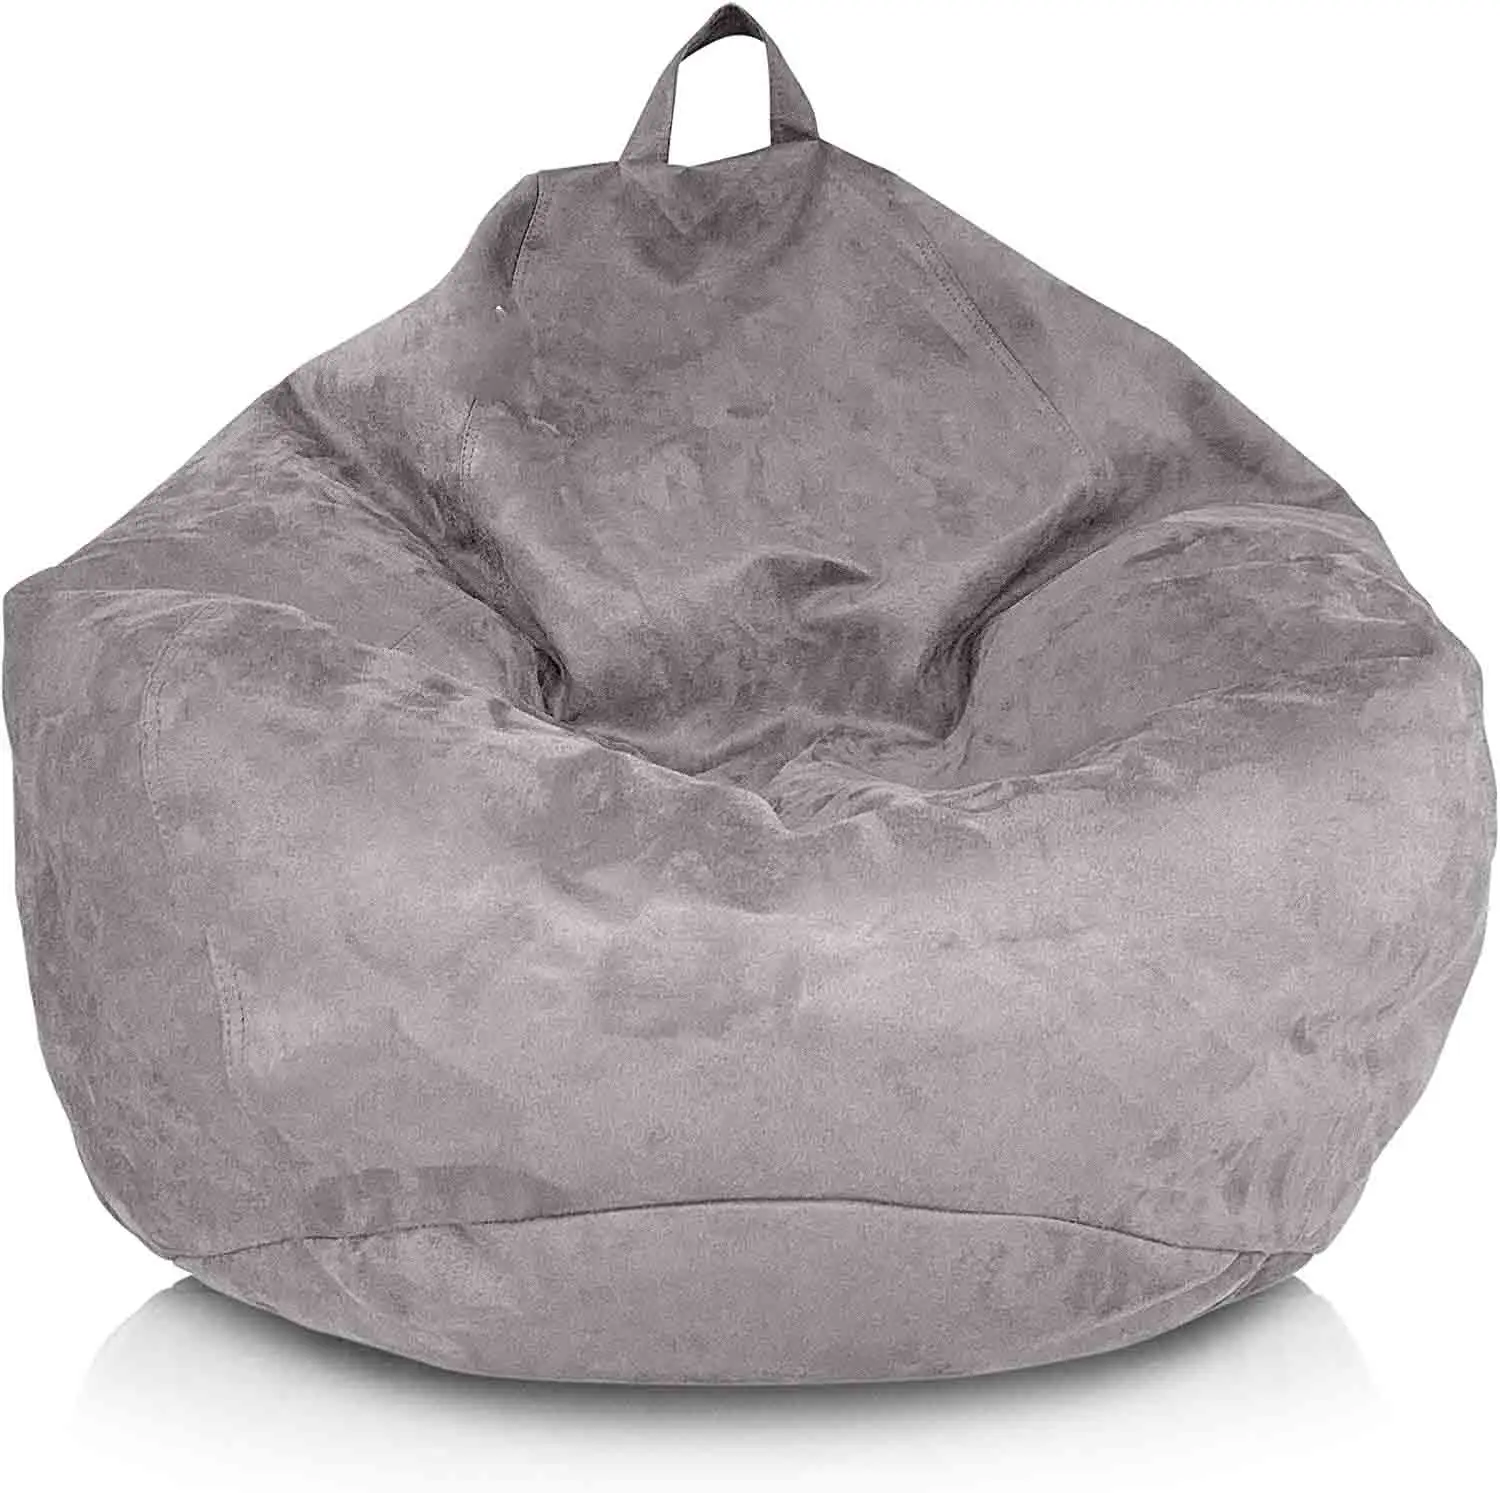 (No Filler) Different material Washable Ultra Soft Corduroy Sturdy Zipper Bean bag chai Cover